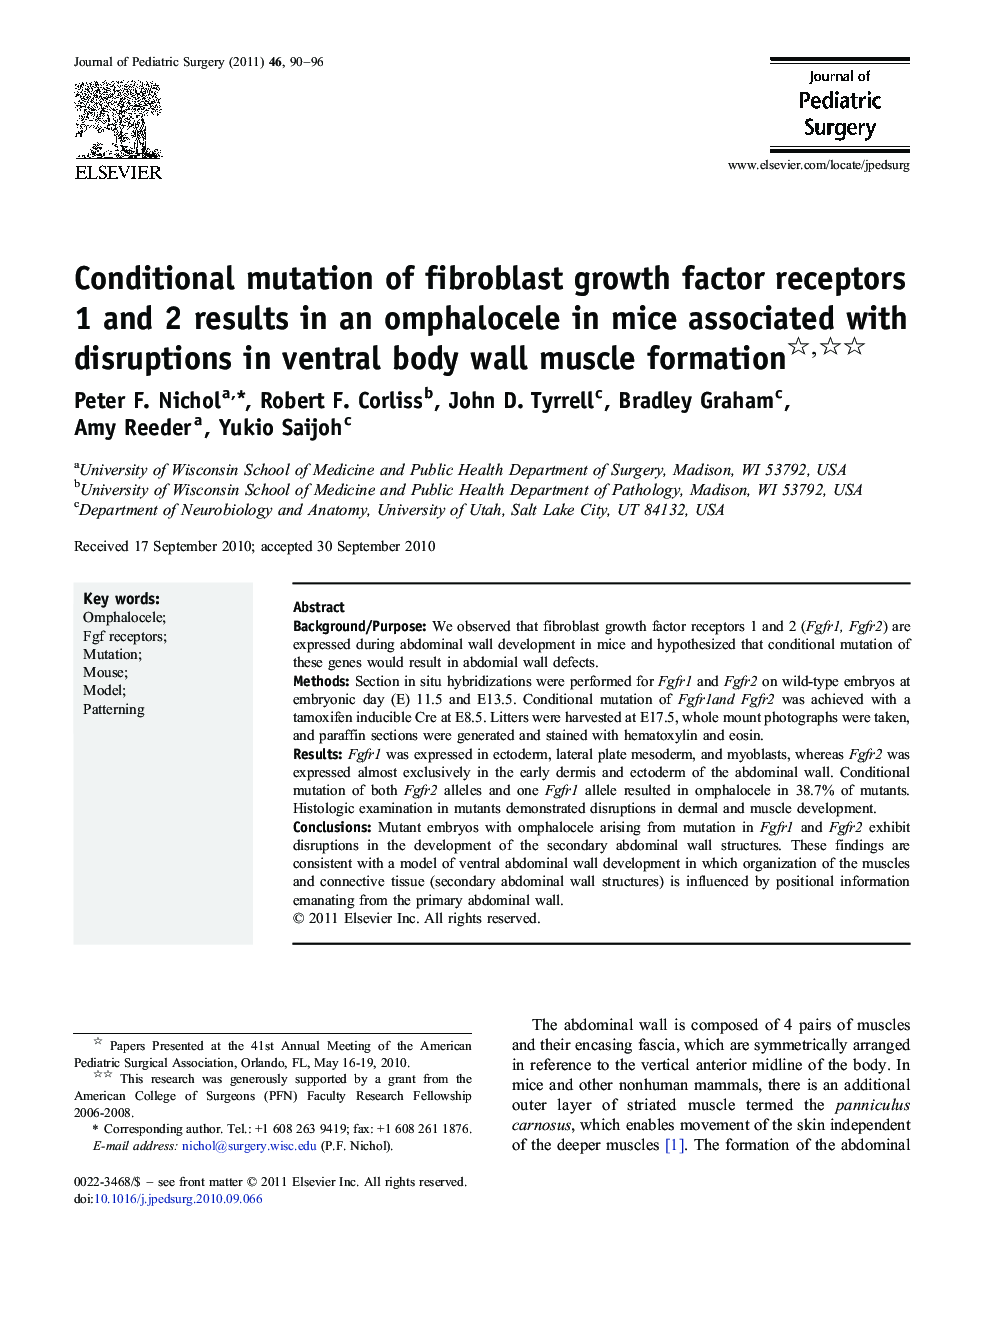 Conditional mutation of fibroblast growth factor receptors 1 and 2 results in an omphalocele in mice associated with disruptions in ventral body wall muscle formation 